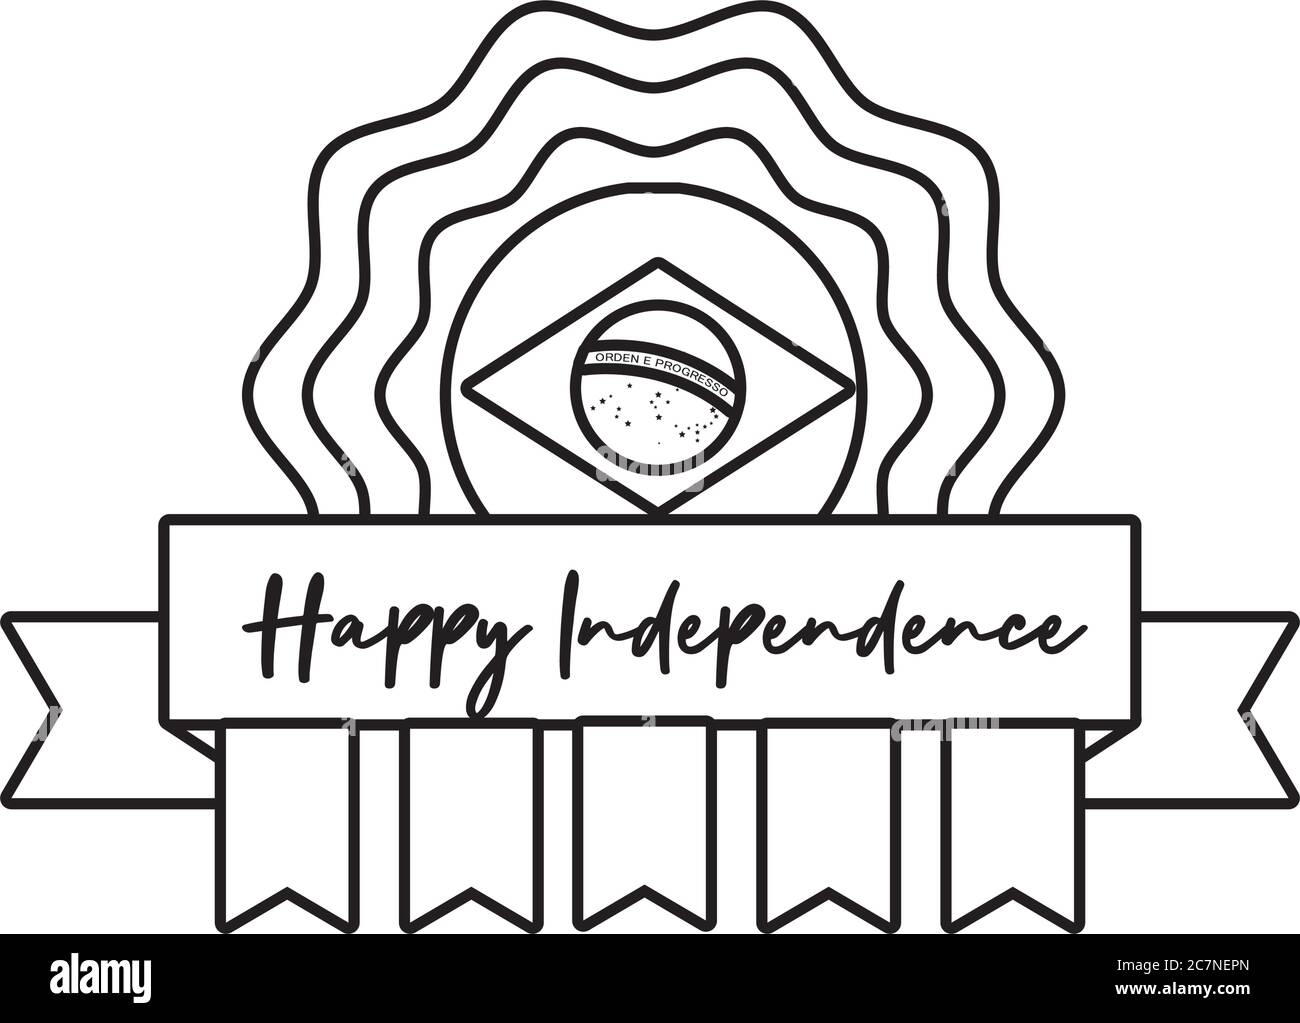 happy independence day brazil card with flag and ribbon frame line style vector illustration design Stock Vector